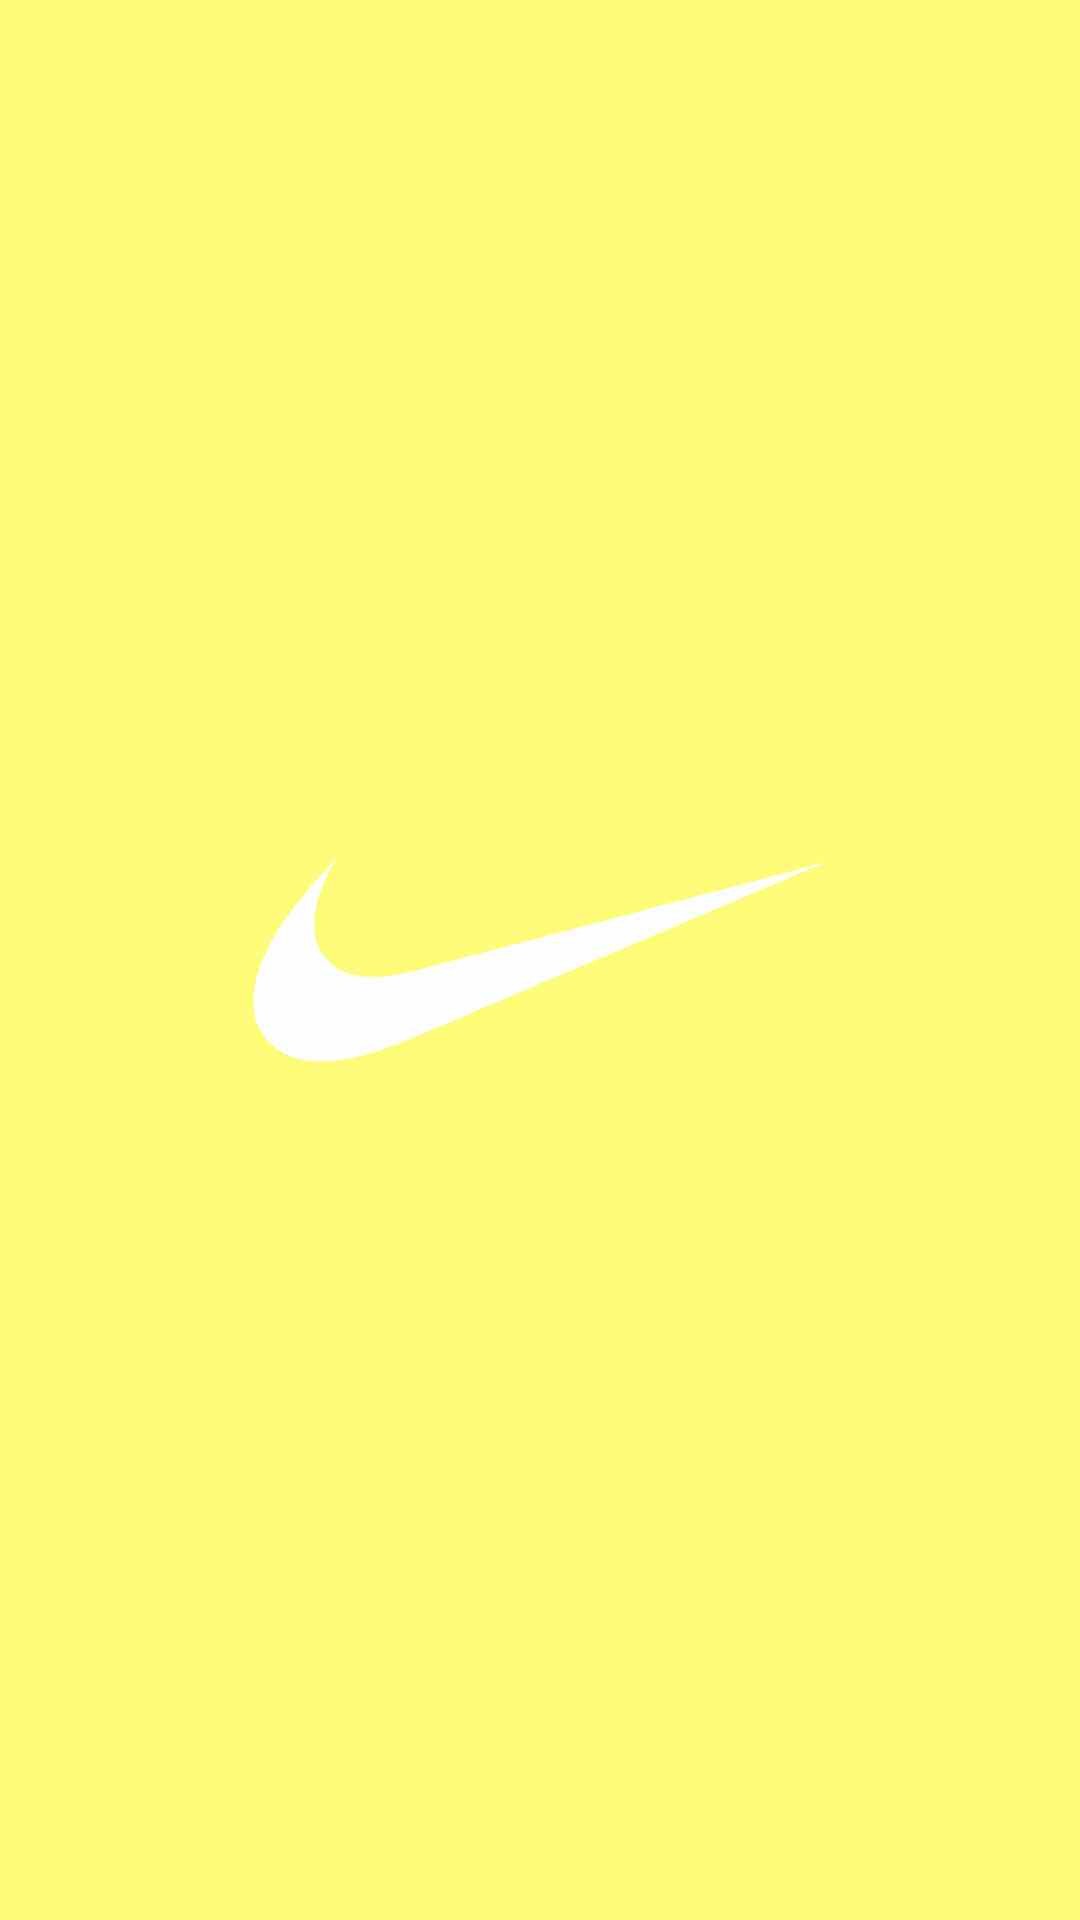 Nike Wallpaper For Iphone 79 Images